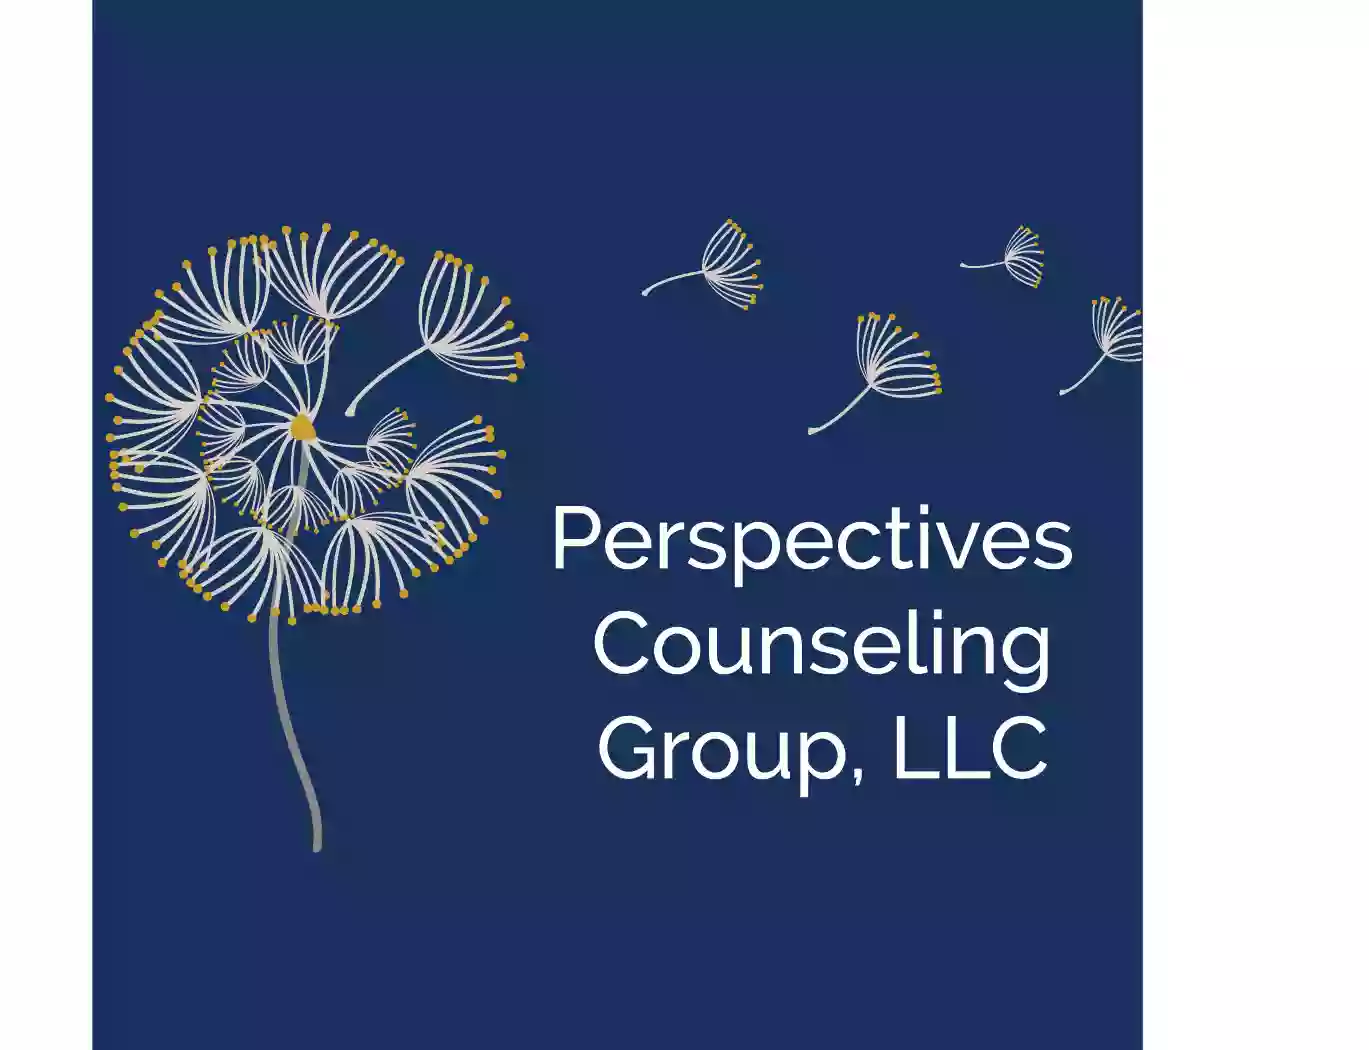 Perspectives Counseling Group, LLC